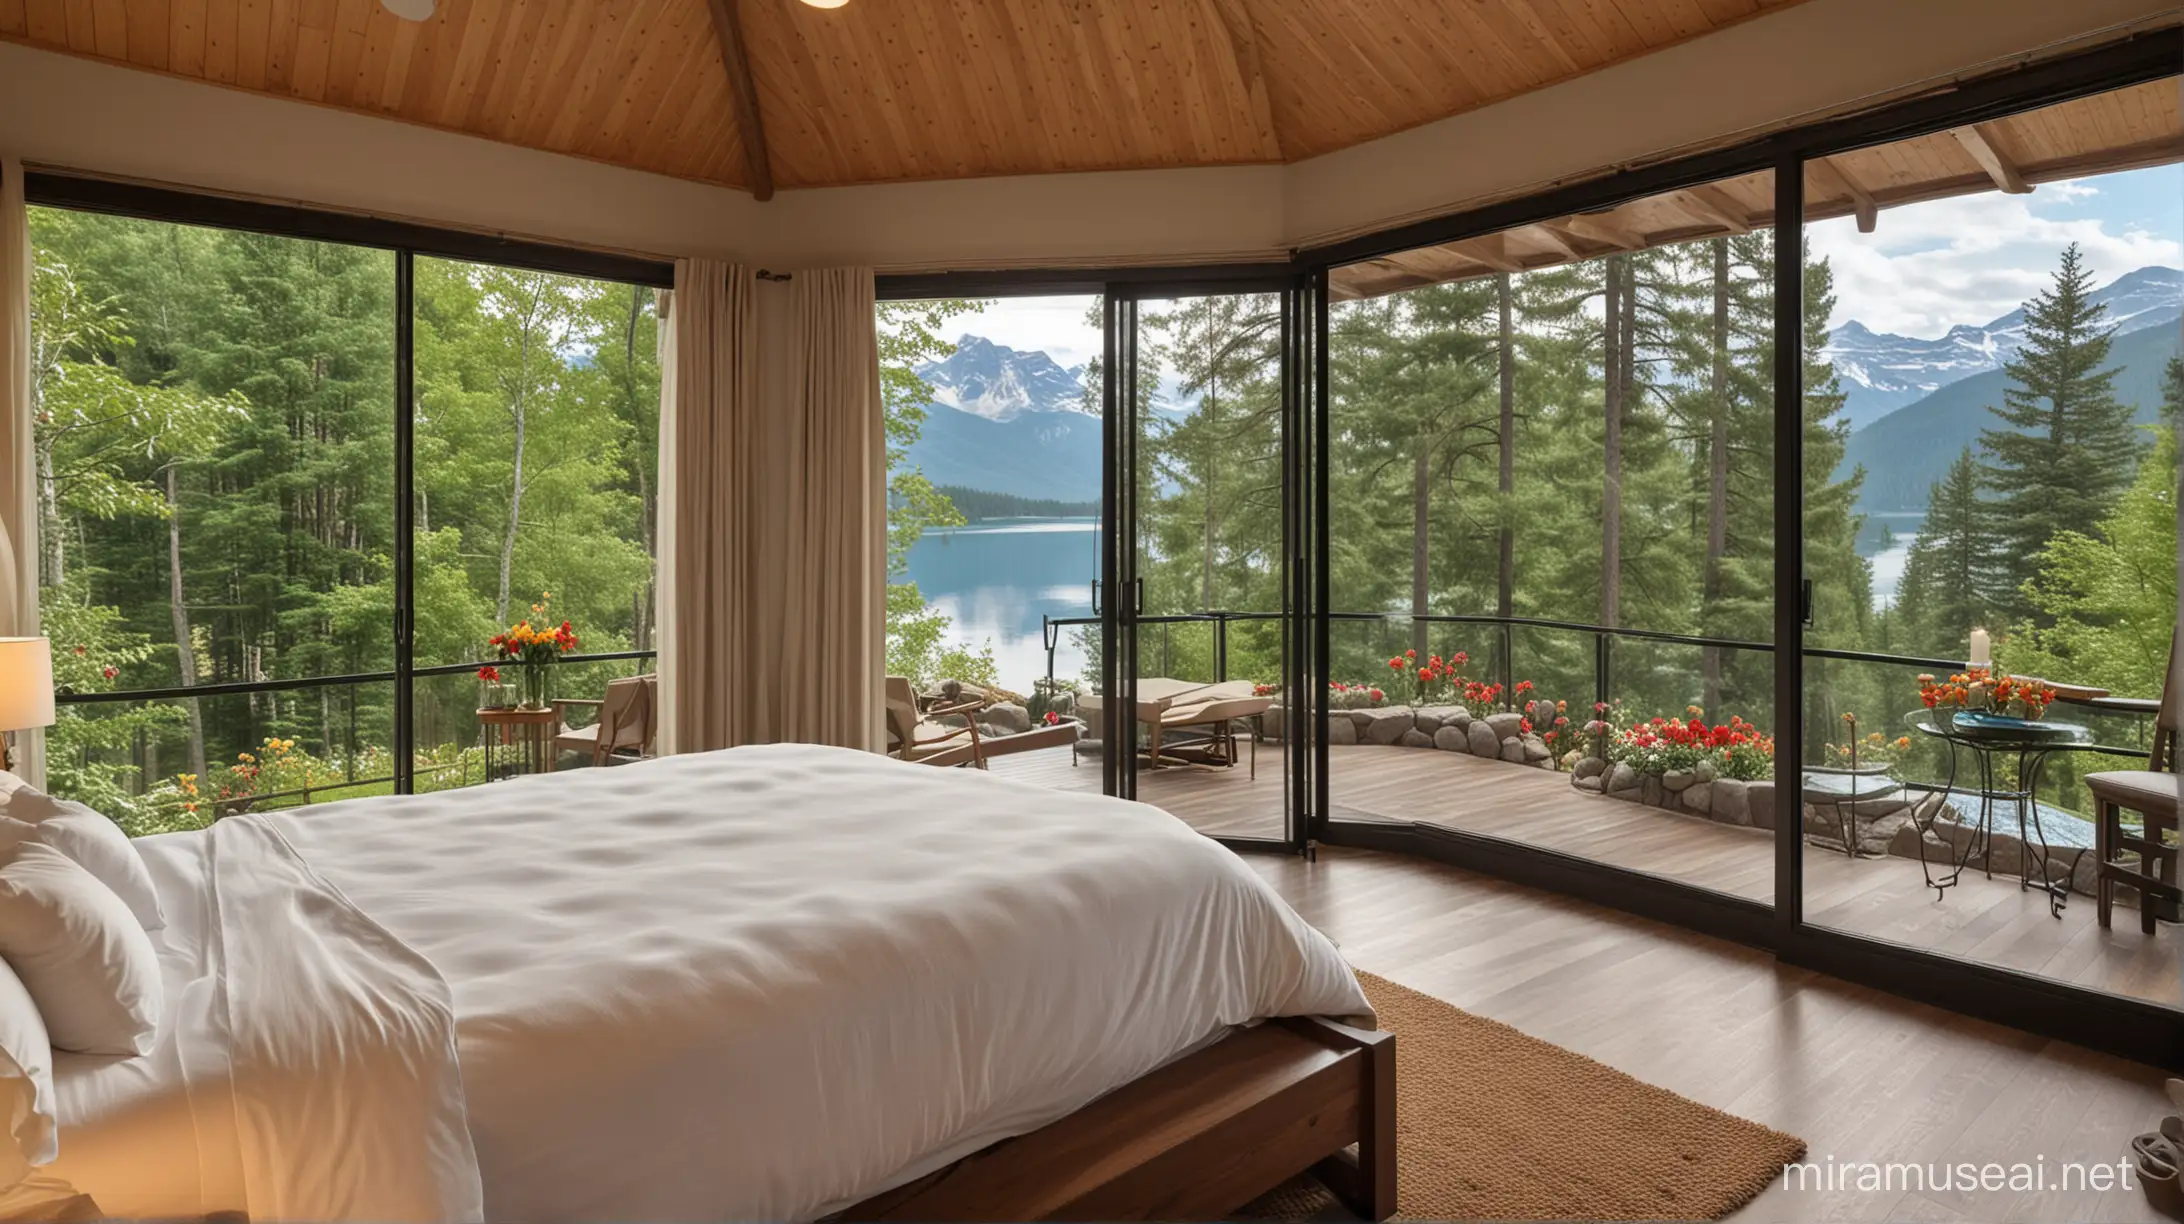 Tranquil Resort Bedroom with Lake and Mountain Views